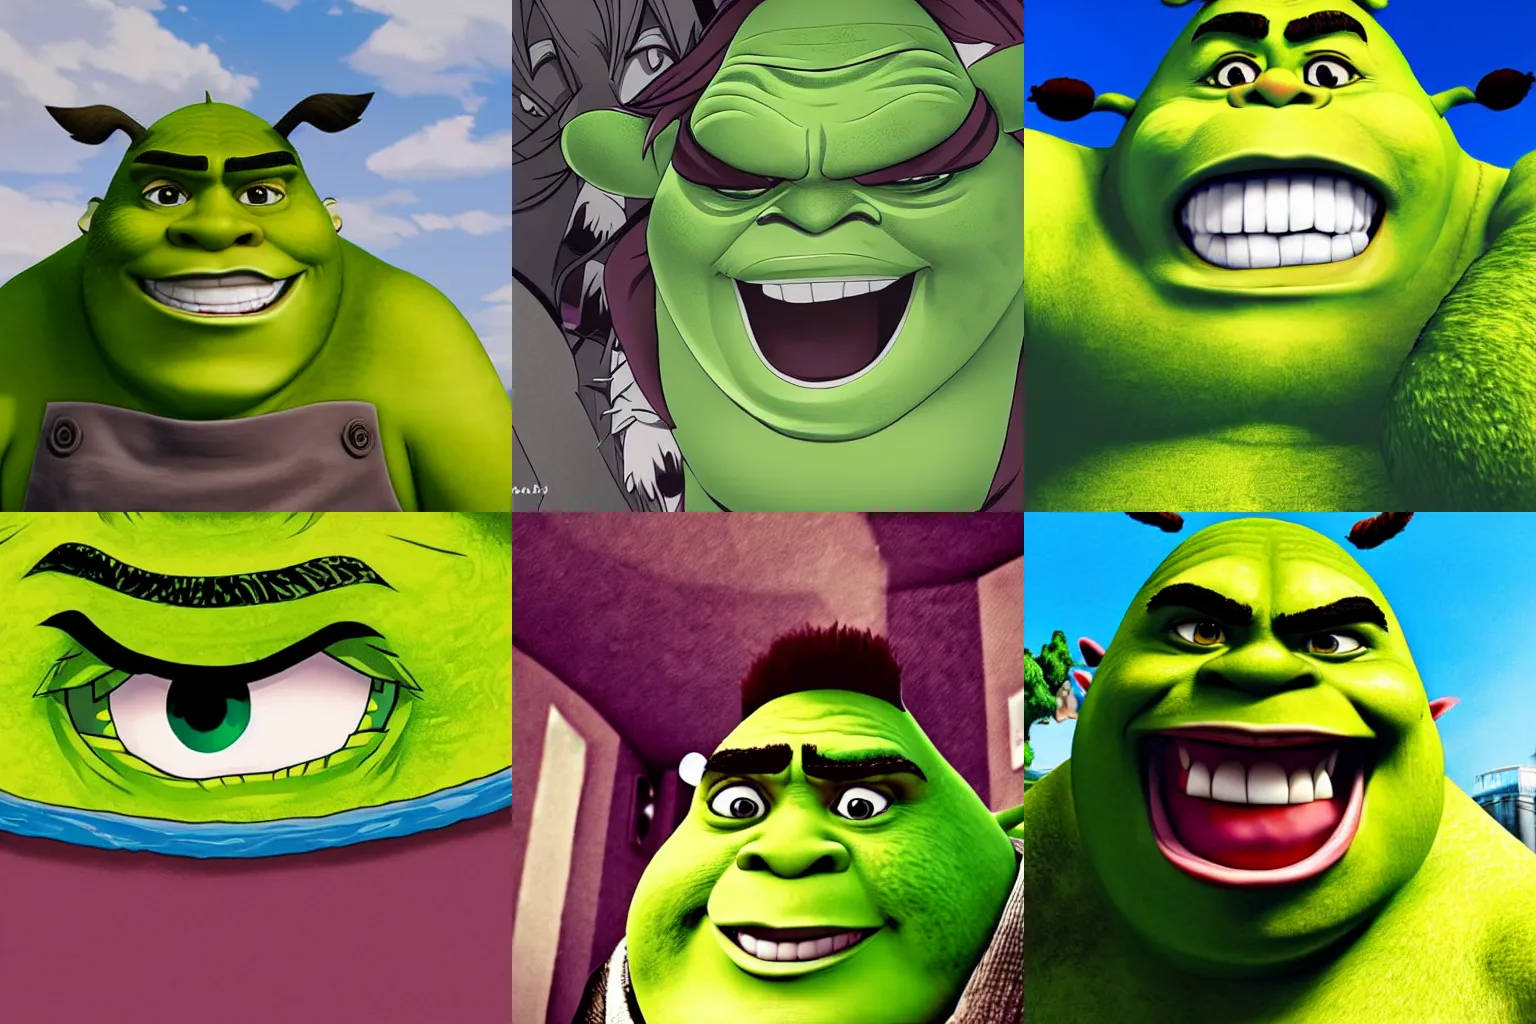 Shrek is best anime, come at me Mods : r/Animemes